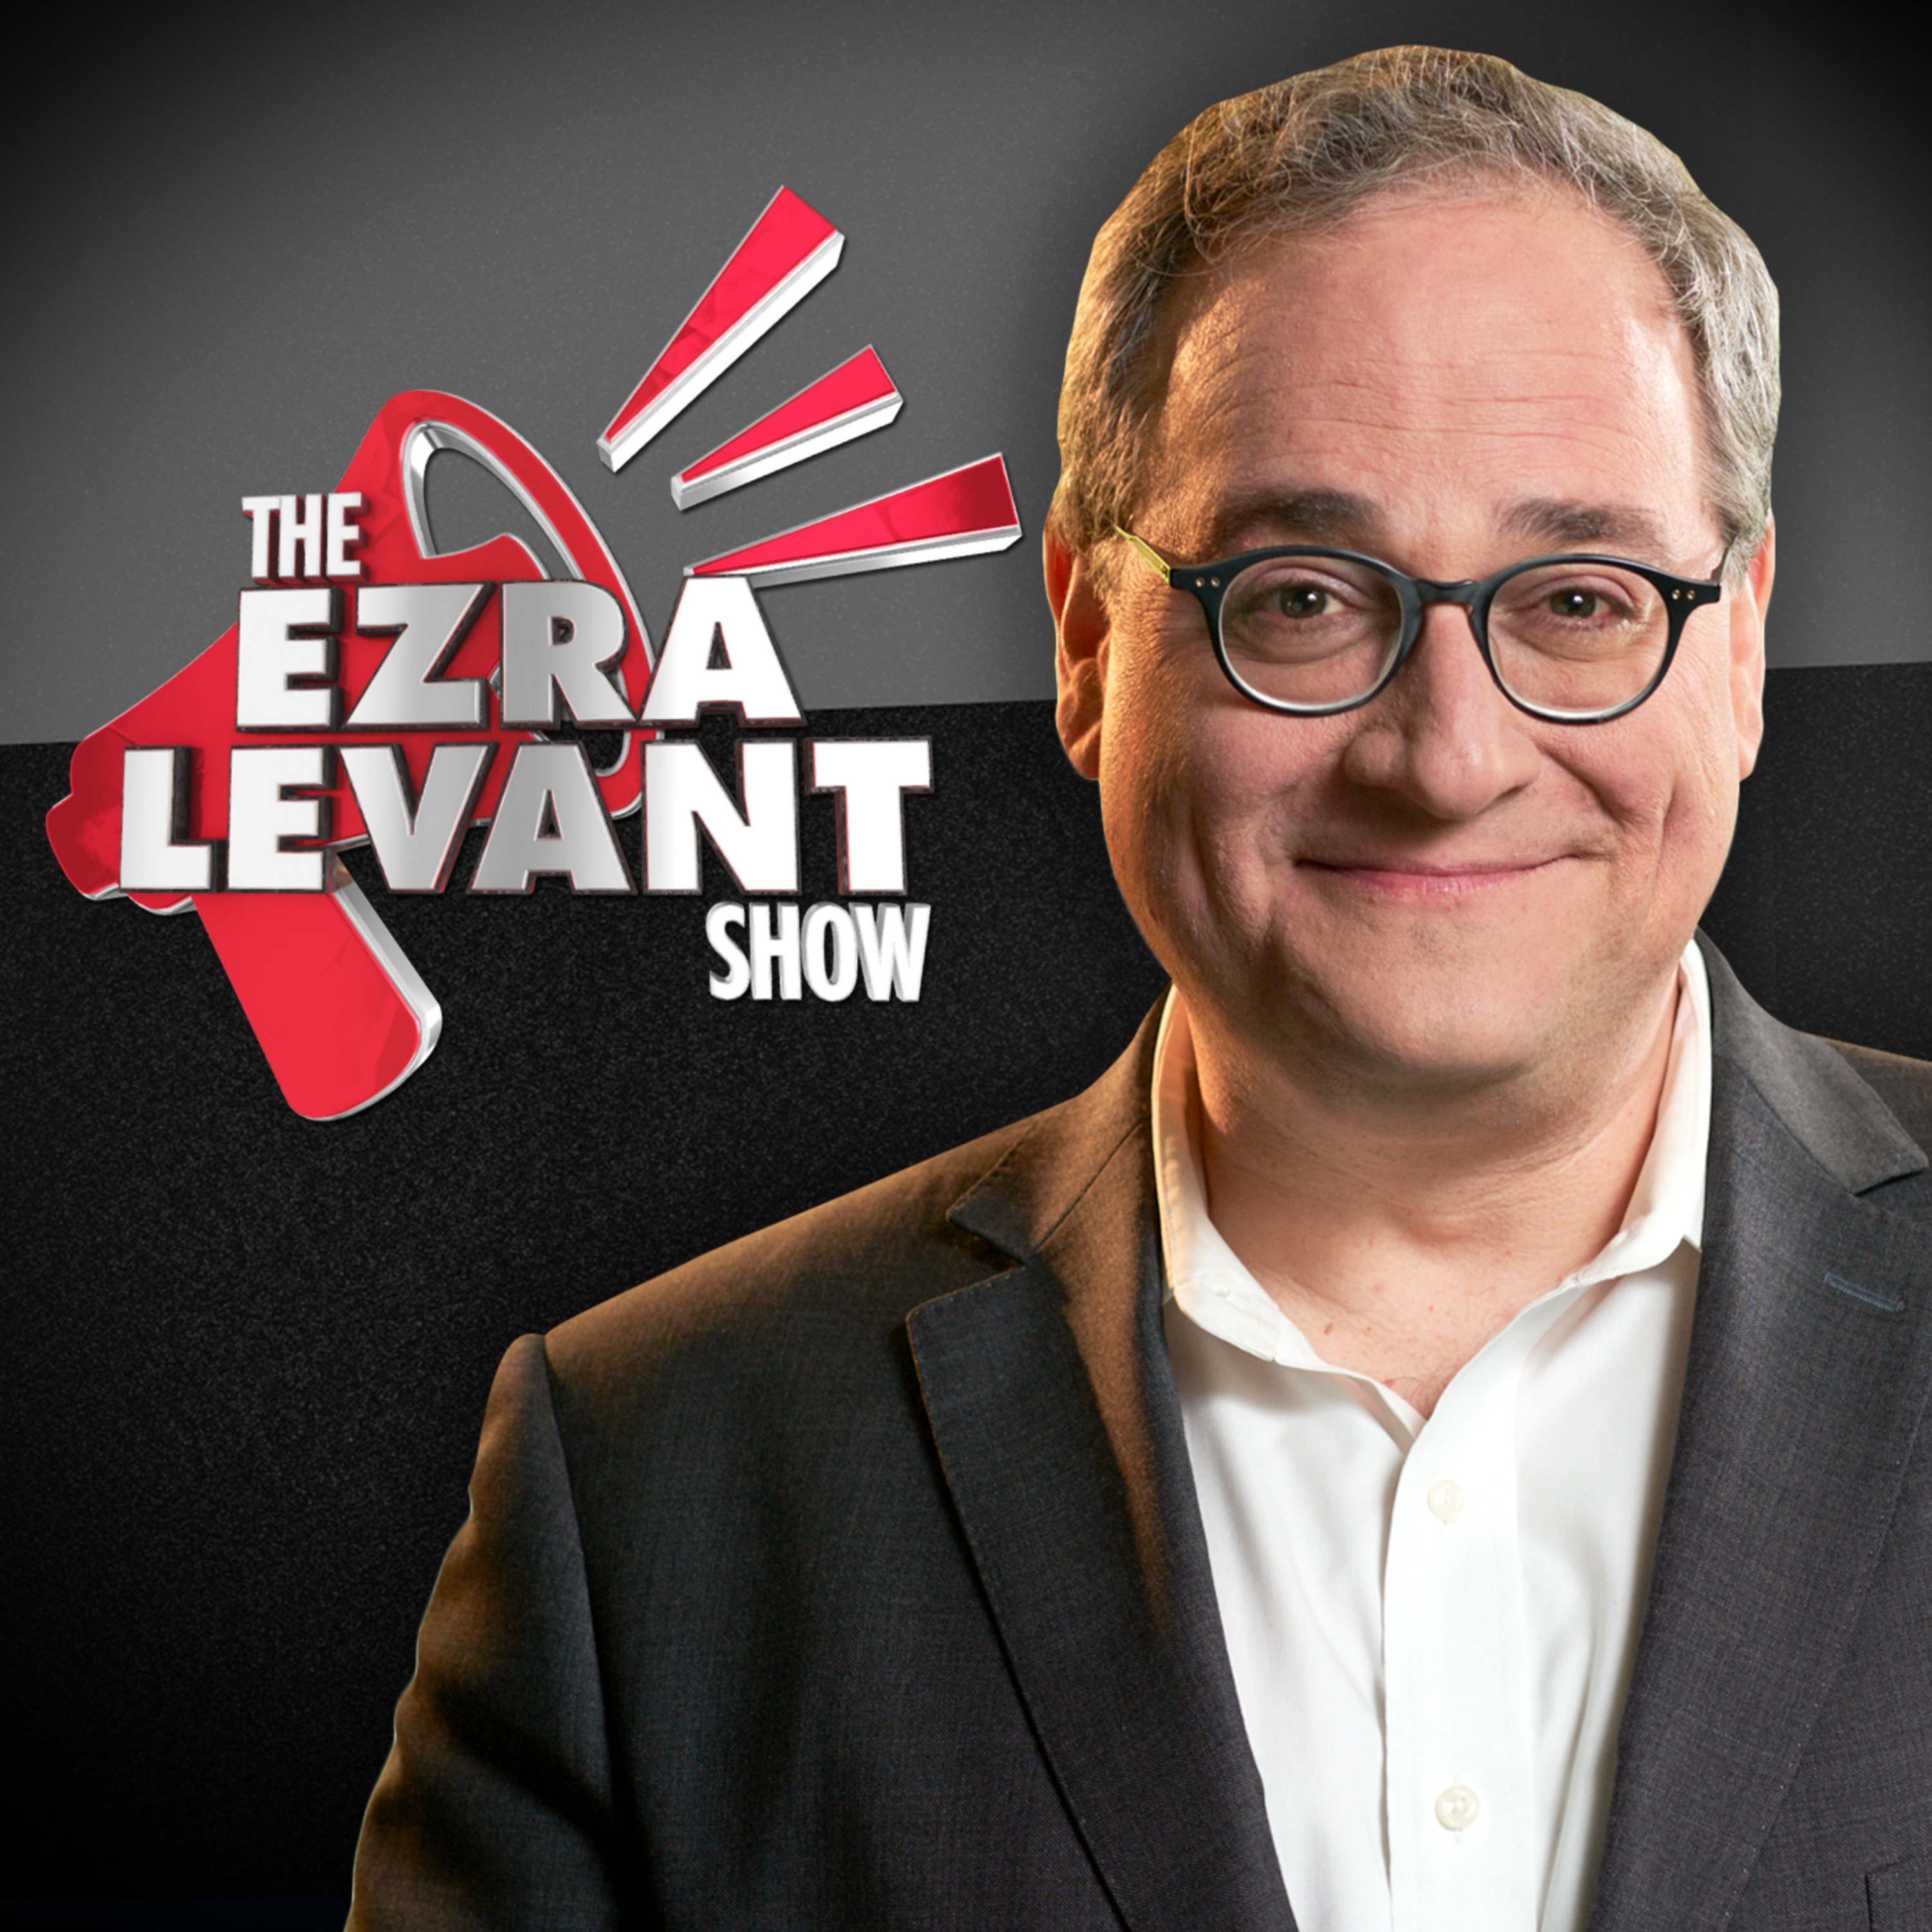 EZRA LEVANT | I’m curious about a few things but I’m worried I’ll get in trouble for asking about them